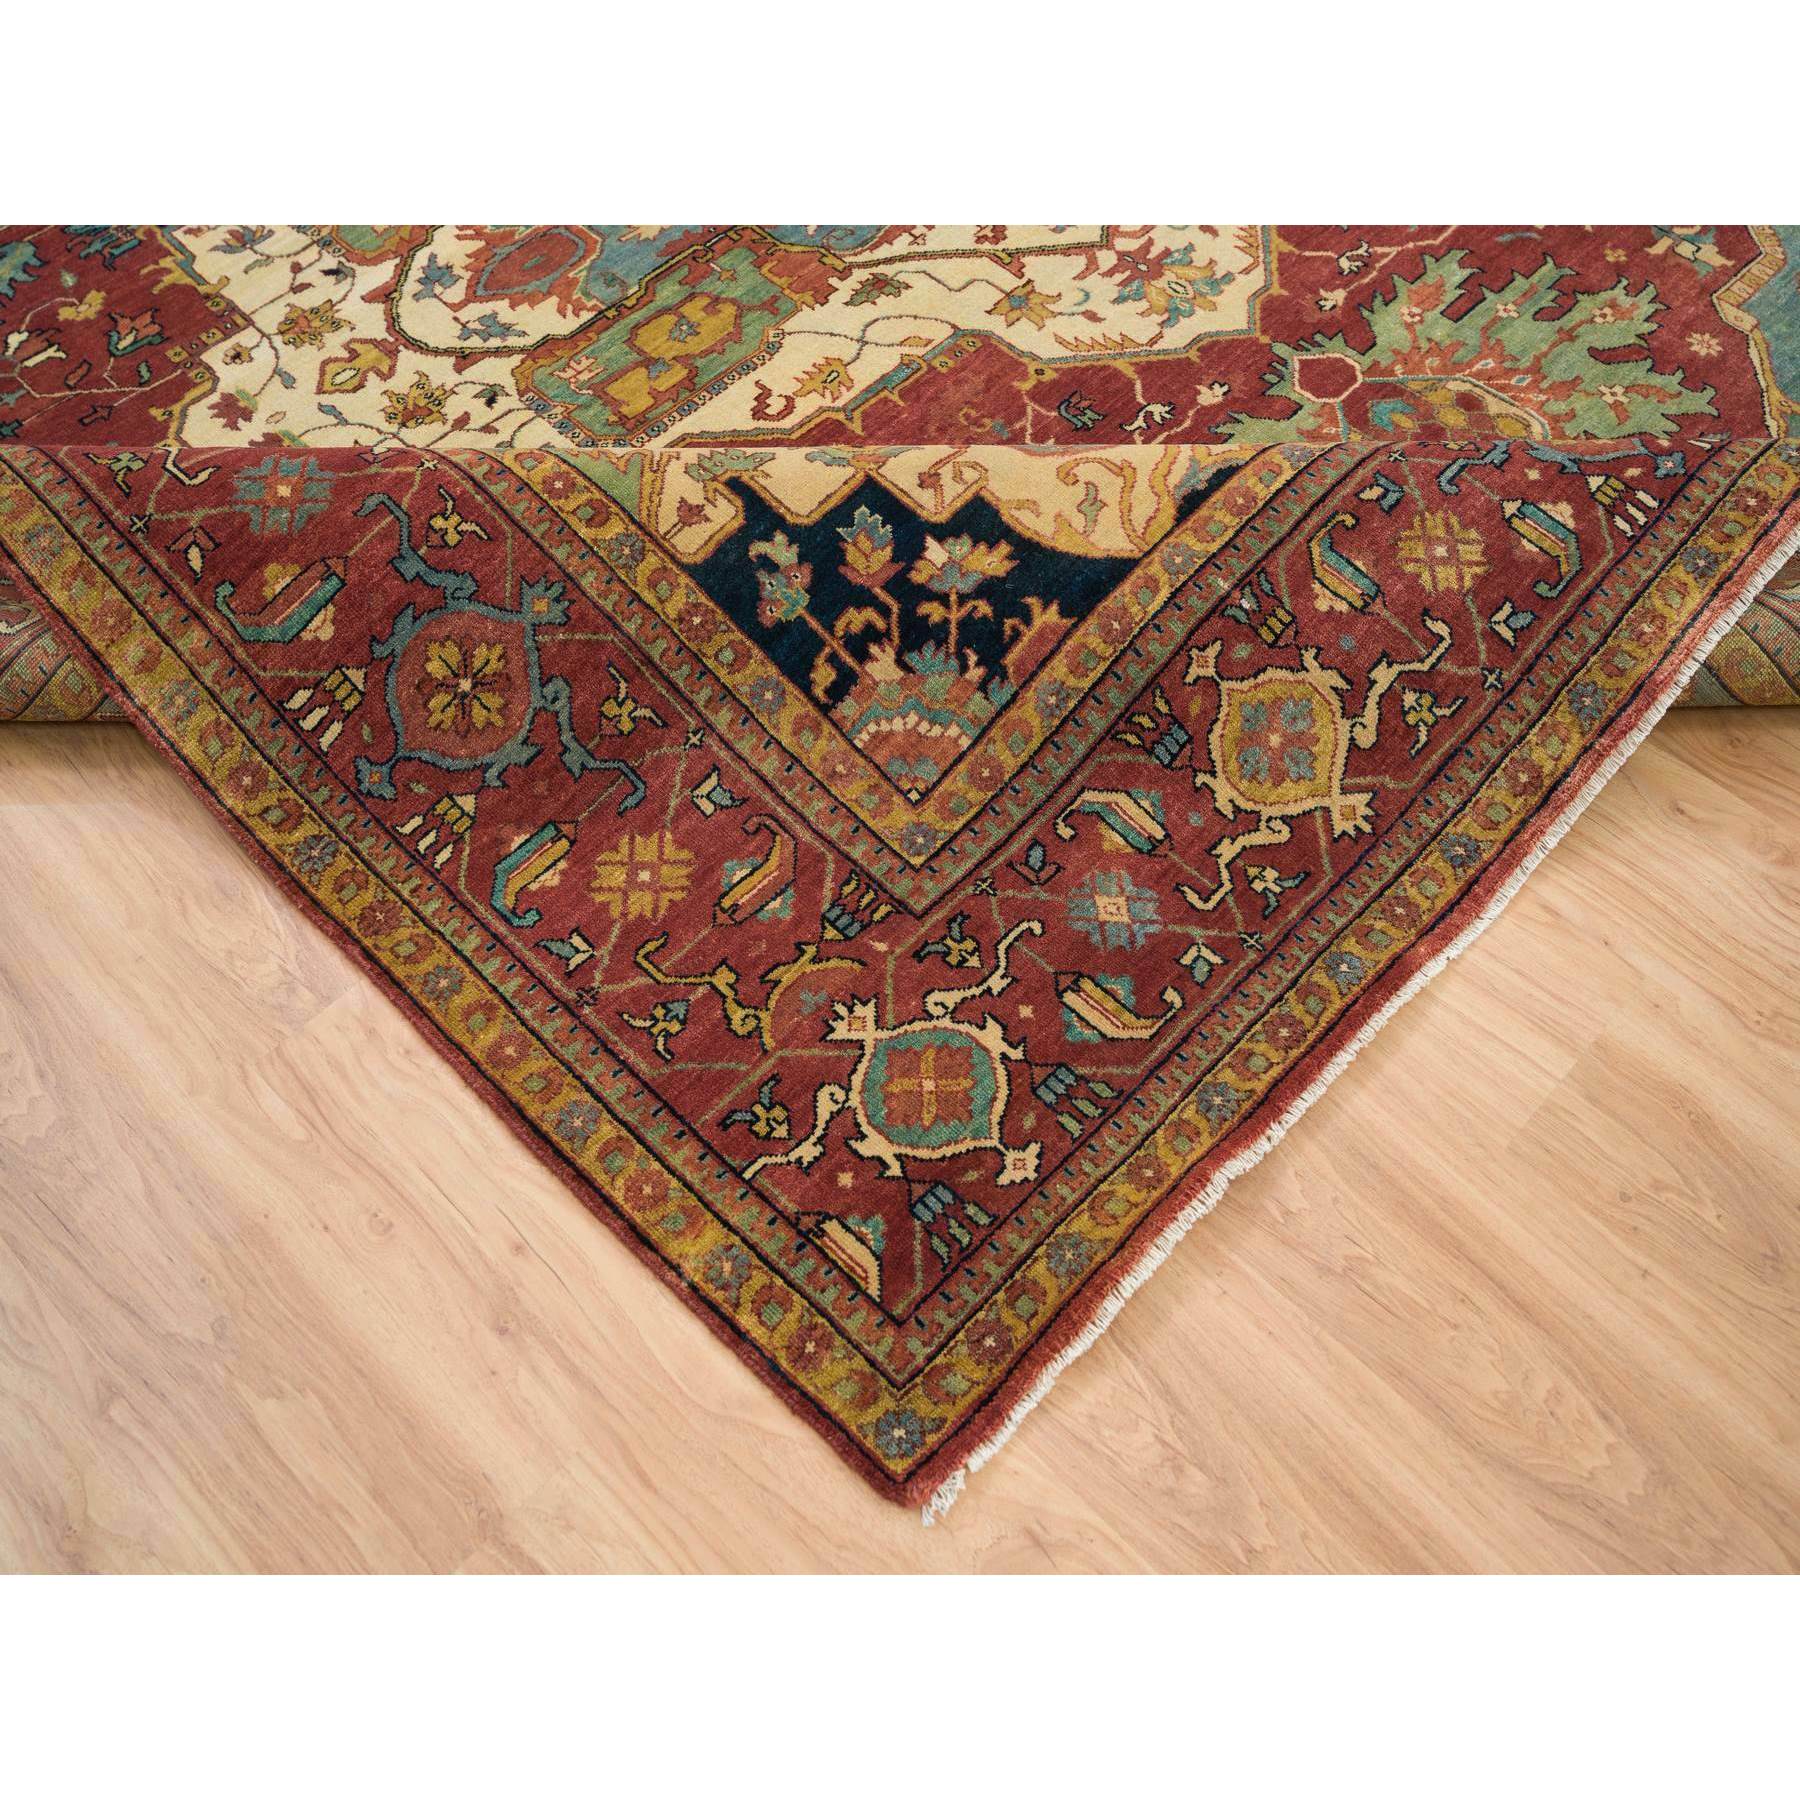 9'8"x10'1" Terracotta Red, Soft Wool, Antiqued Fine Heriz Re-Creation, Natural Dyes, Hand Woven, Densely Woven, Square Oriental Rug 